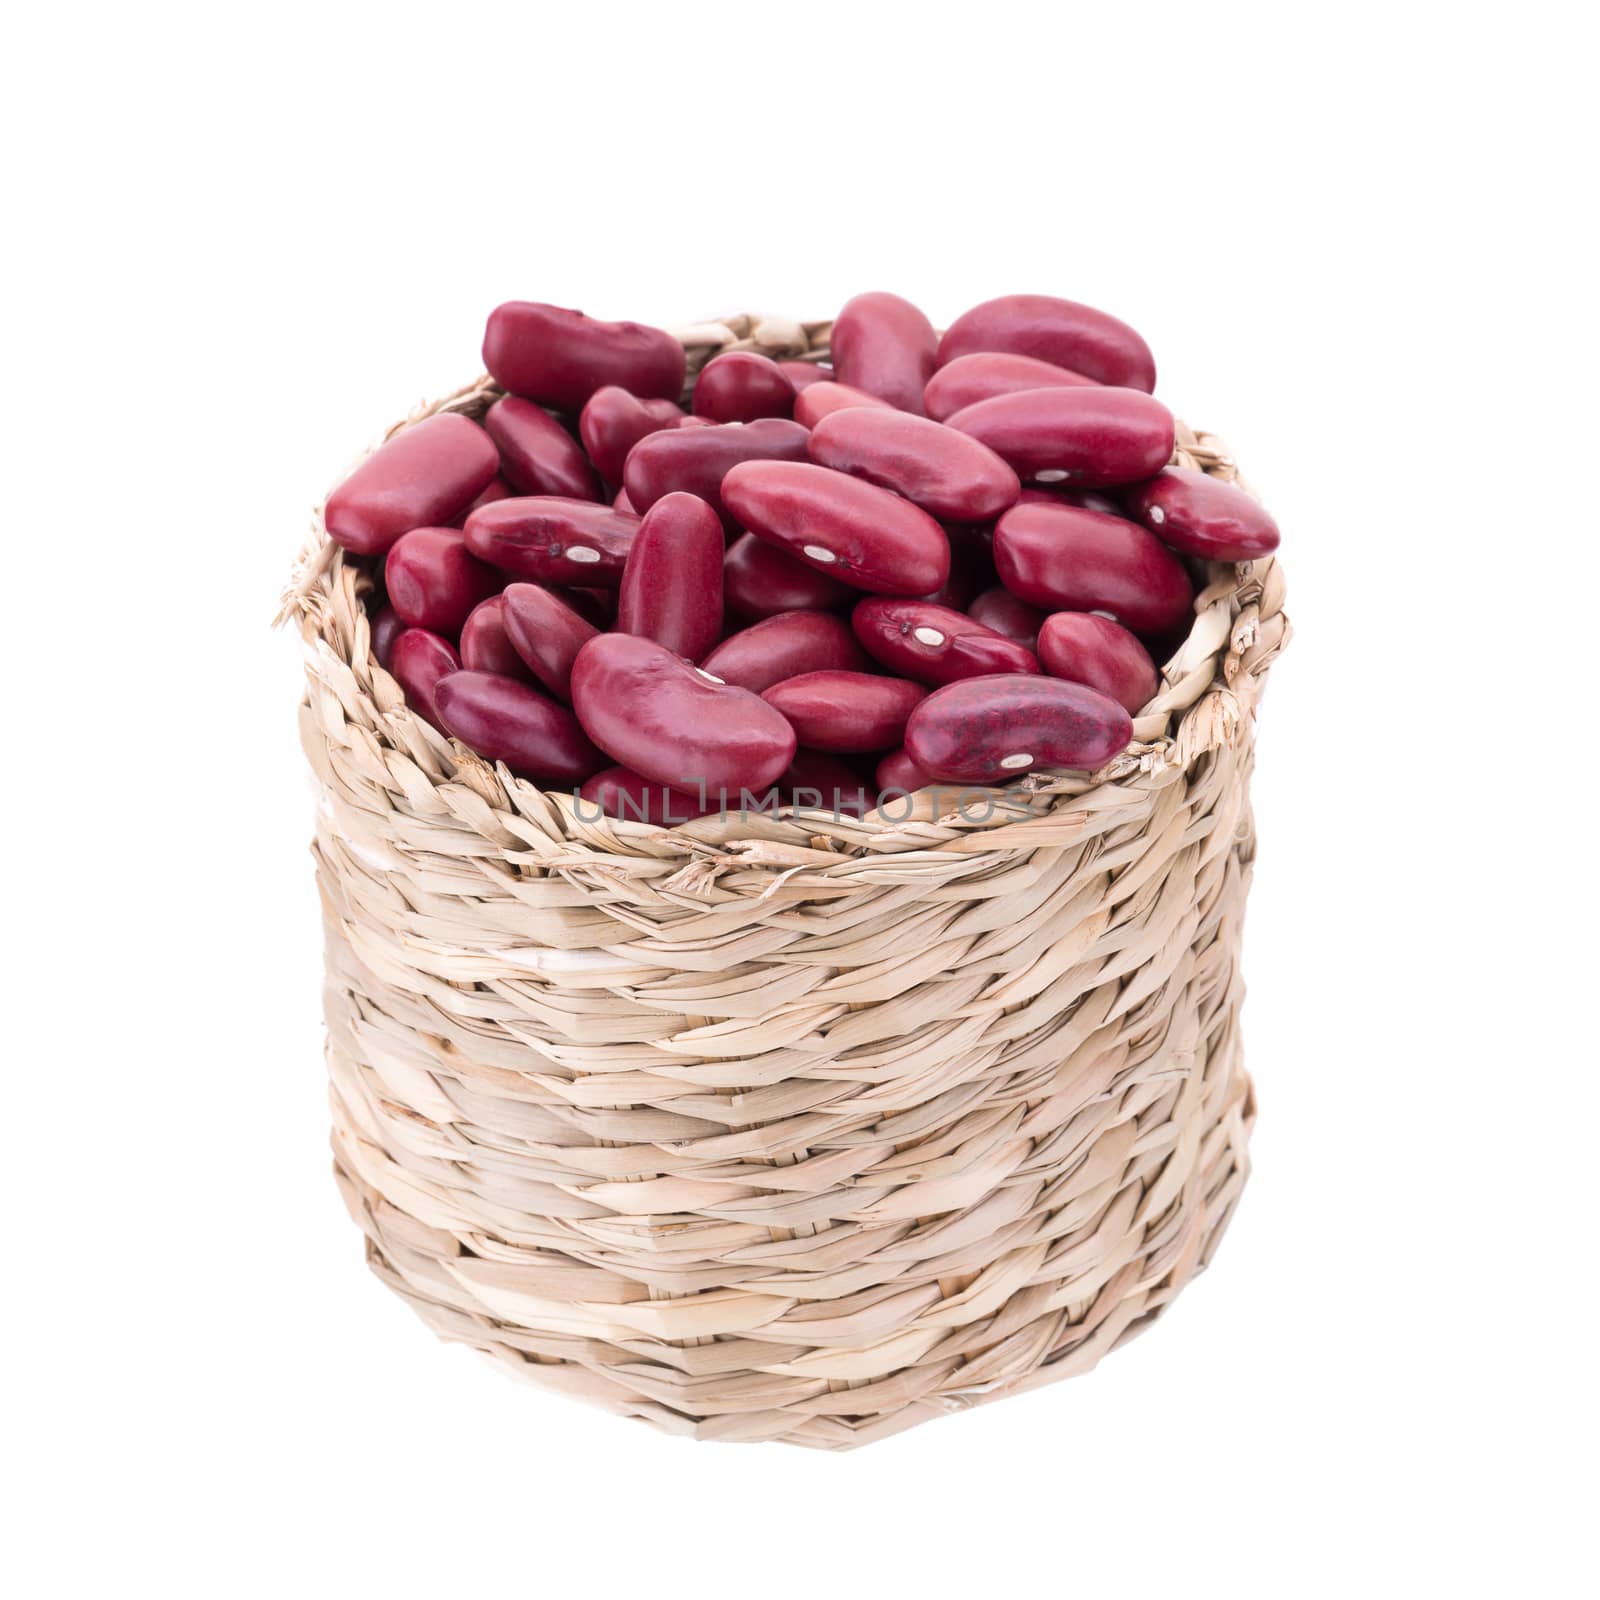 Red bean in basket isolated on a white background.